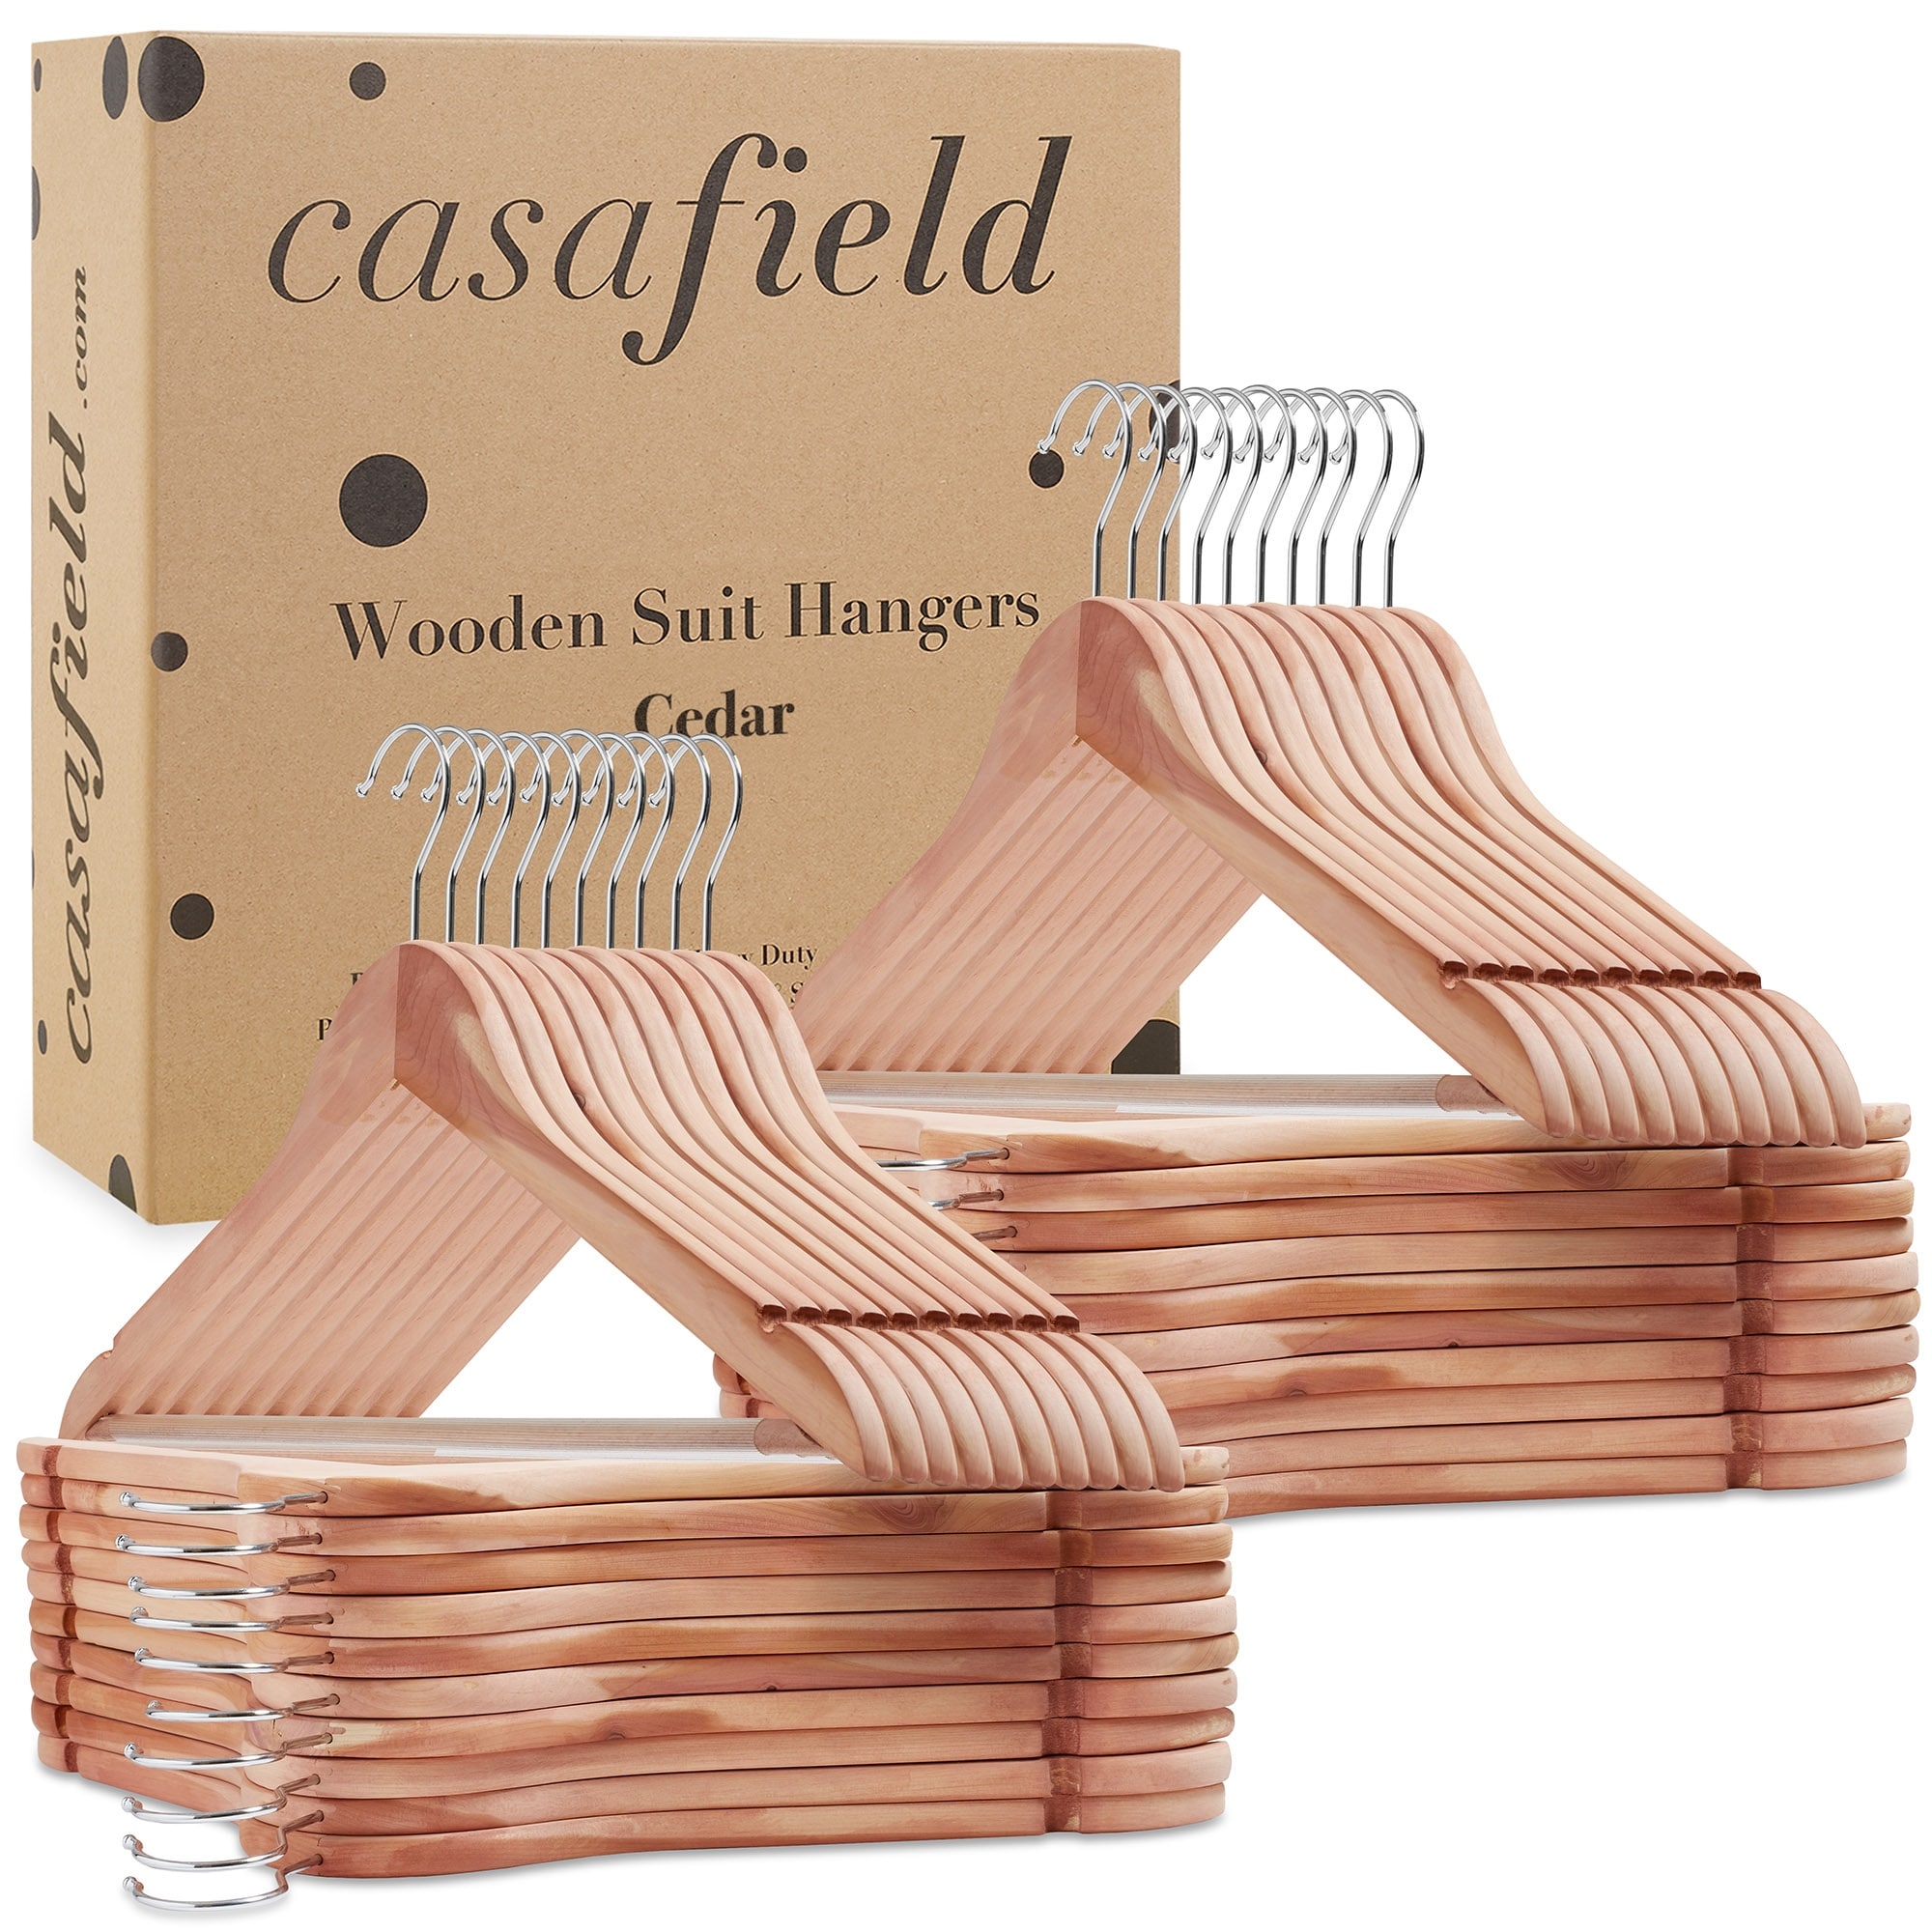 https://ak1.ostkcdn.com/images/products/is/images/direct/da5eb937dcff1933843d3e47b0cfc1987afe7cb7/40-Red-Cedar-Wooden-Suit-Hangers-by-Casafield.jpg